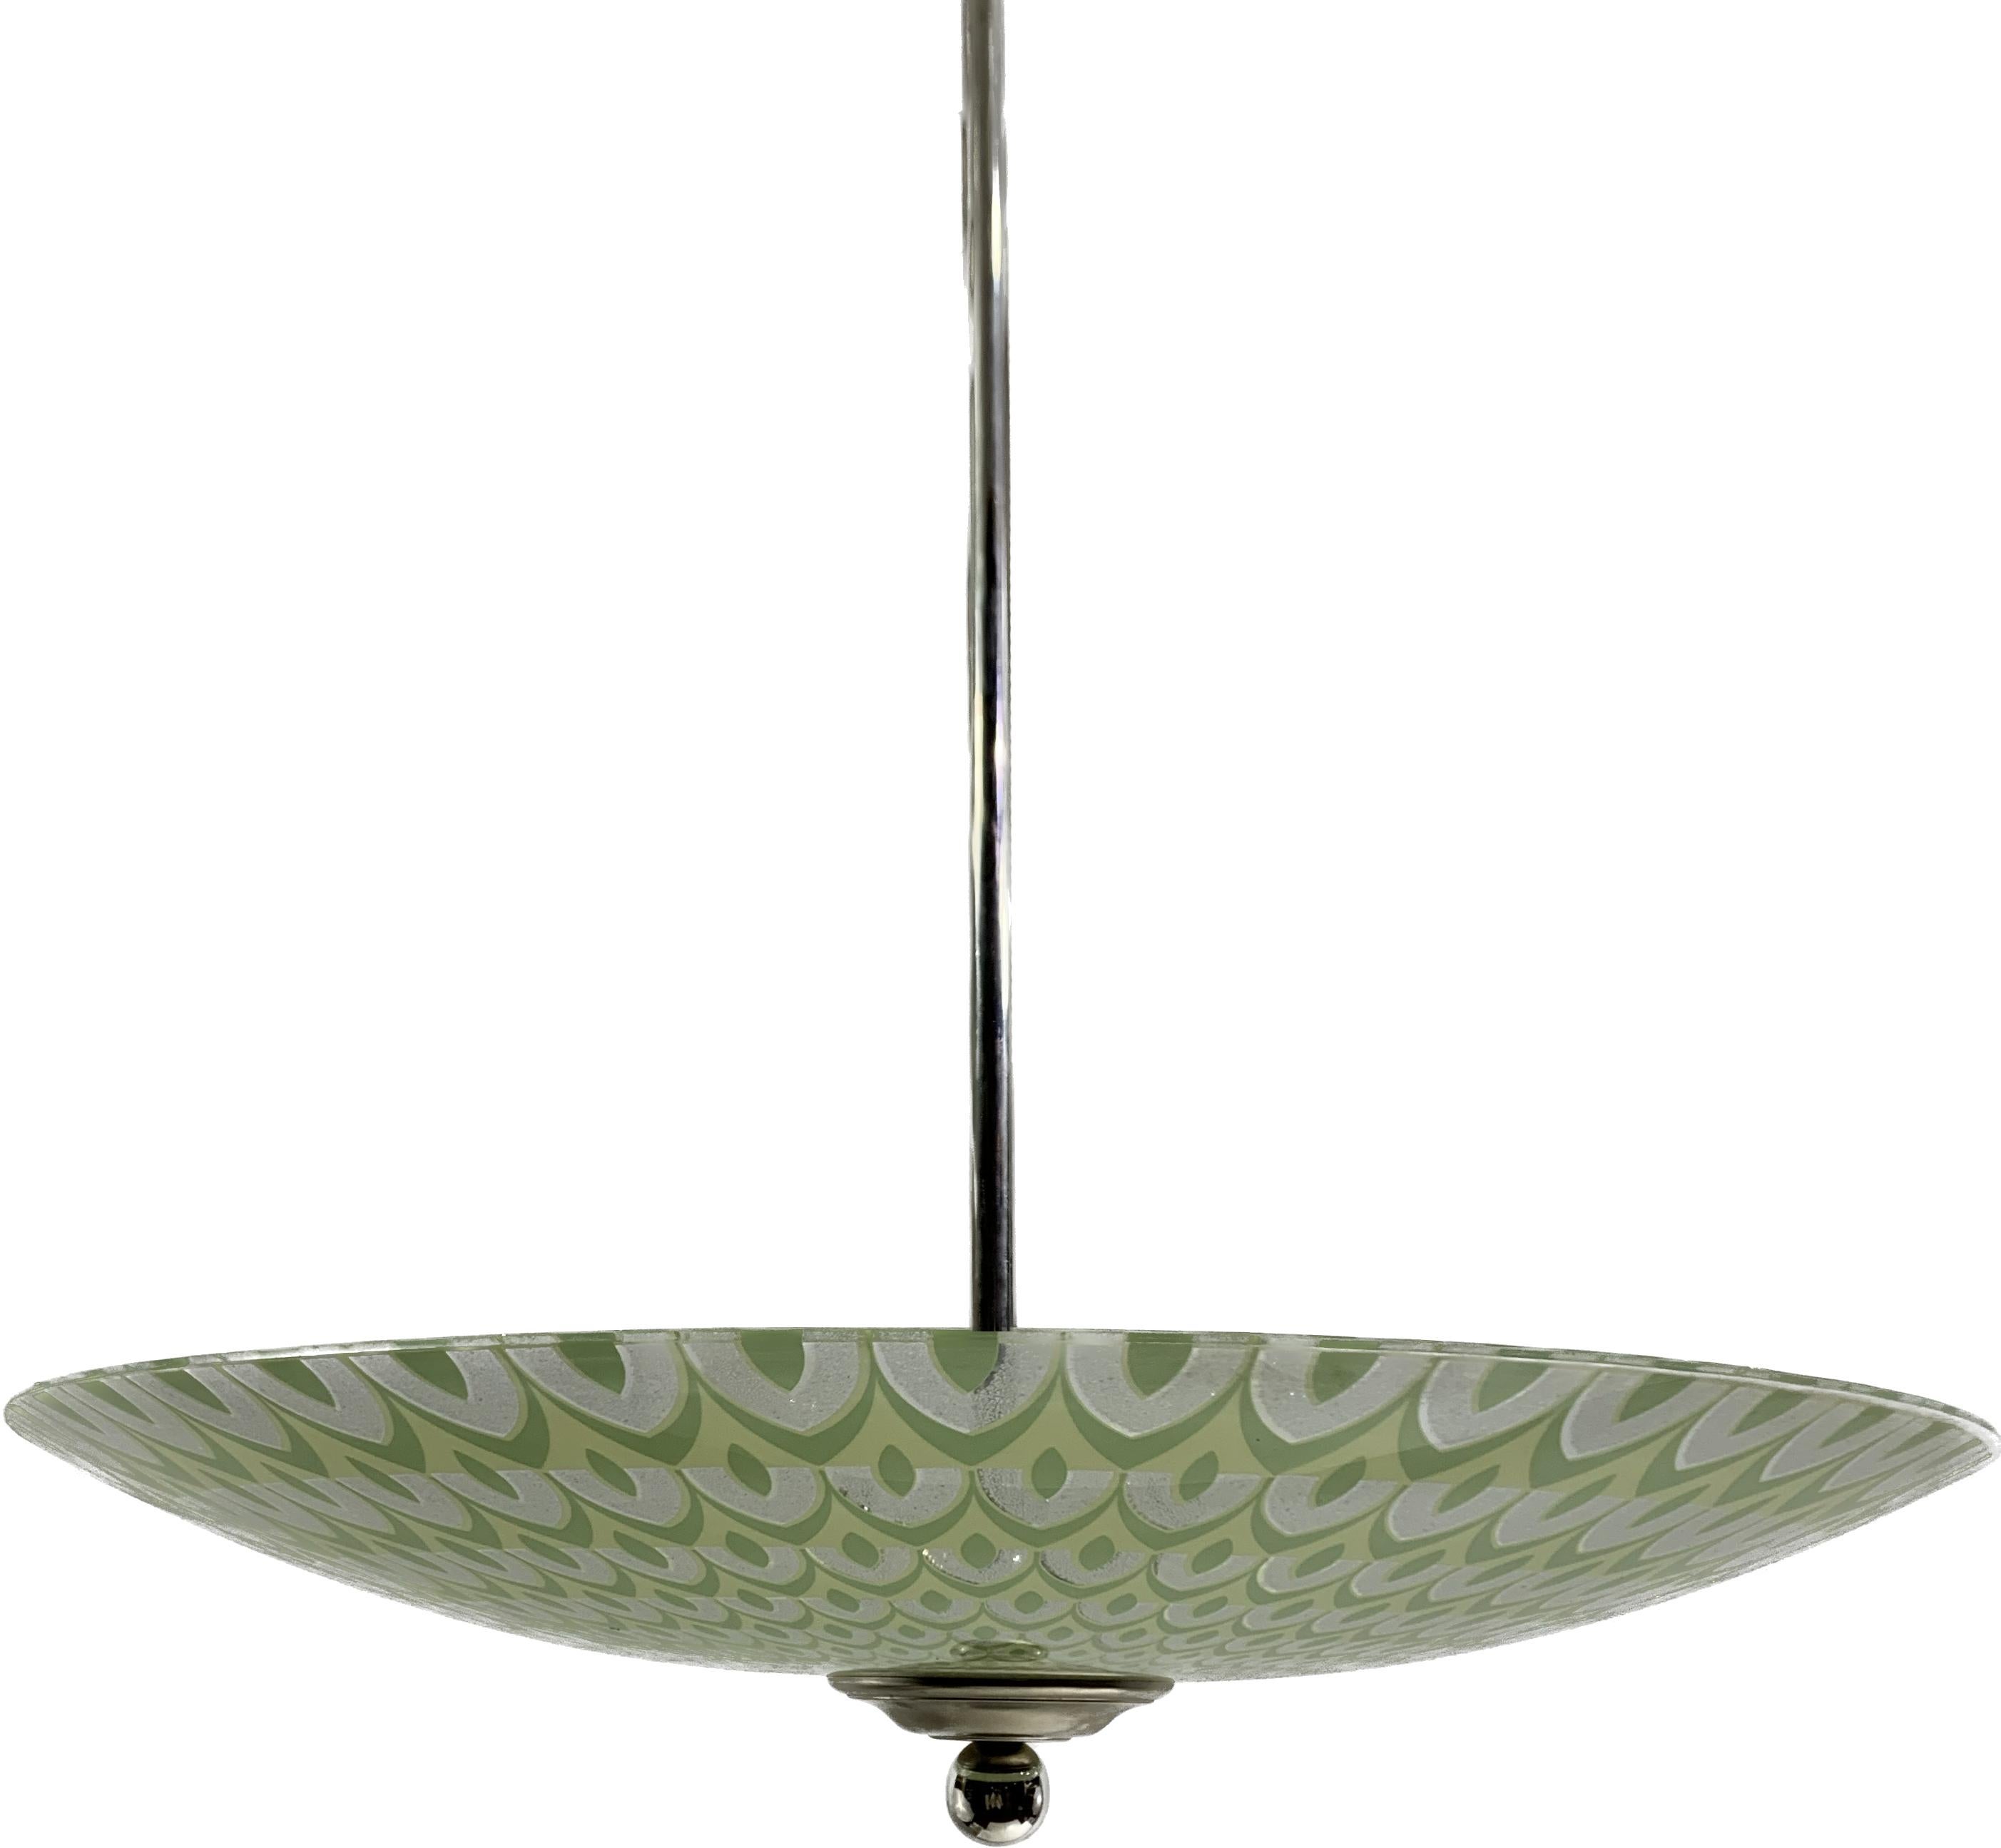 French art Deco modernist pendant light. The structure is metallic. The glassware is in tones and hues of green and lighter green, representing geometric circular patterns spiralling all around the lampshade. These designs and colours are typical of